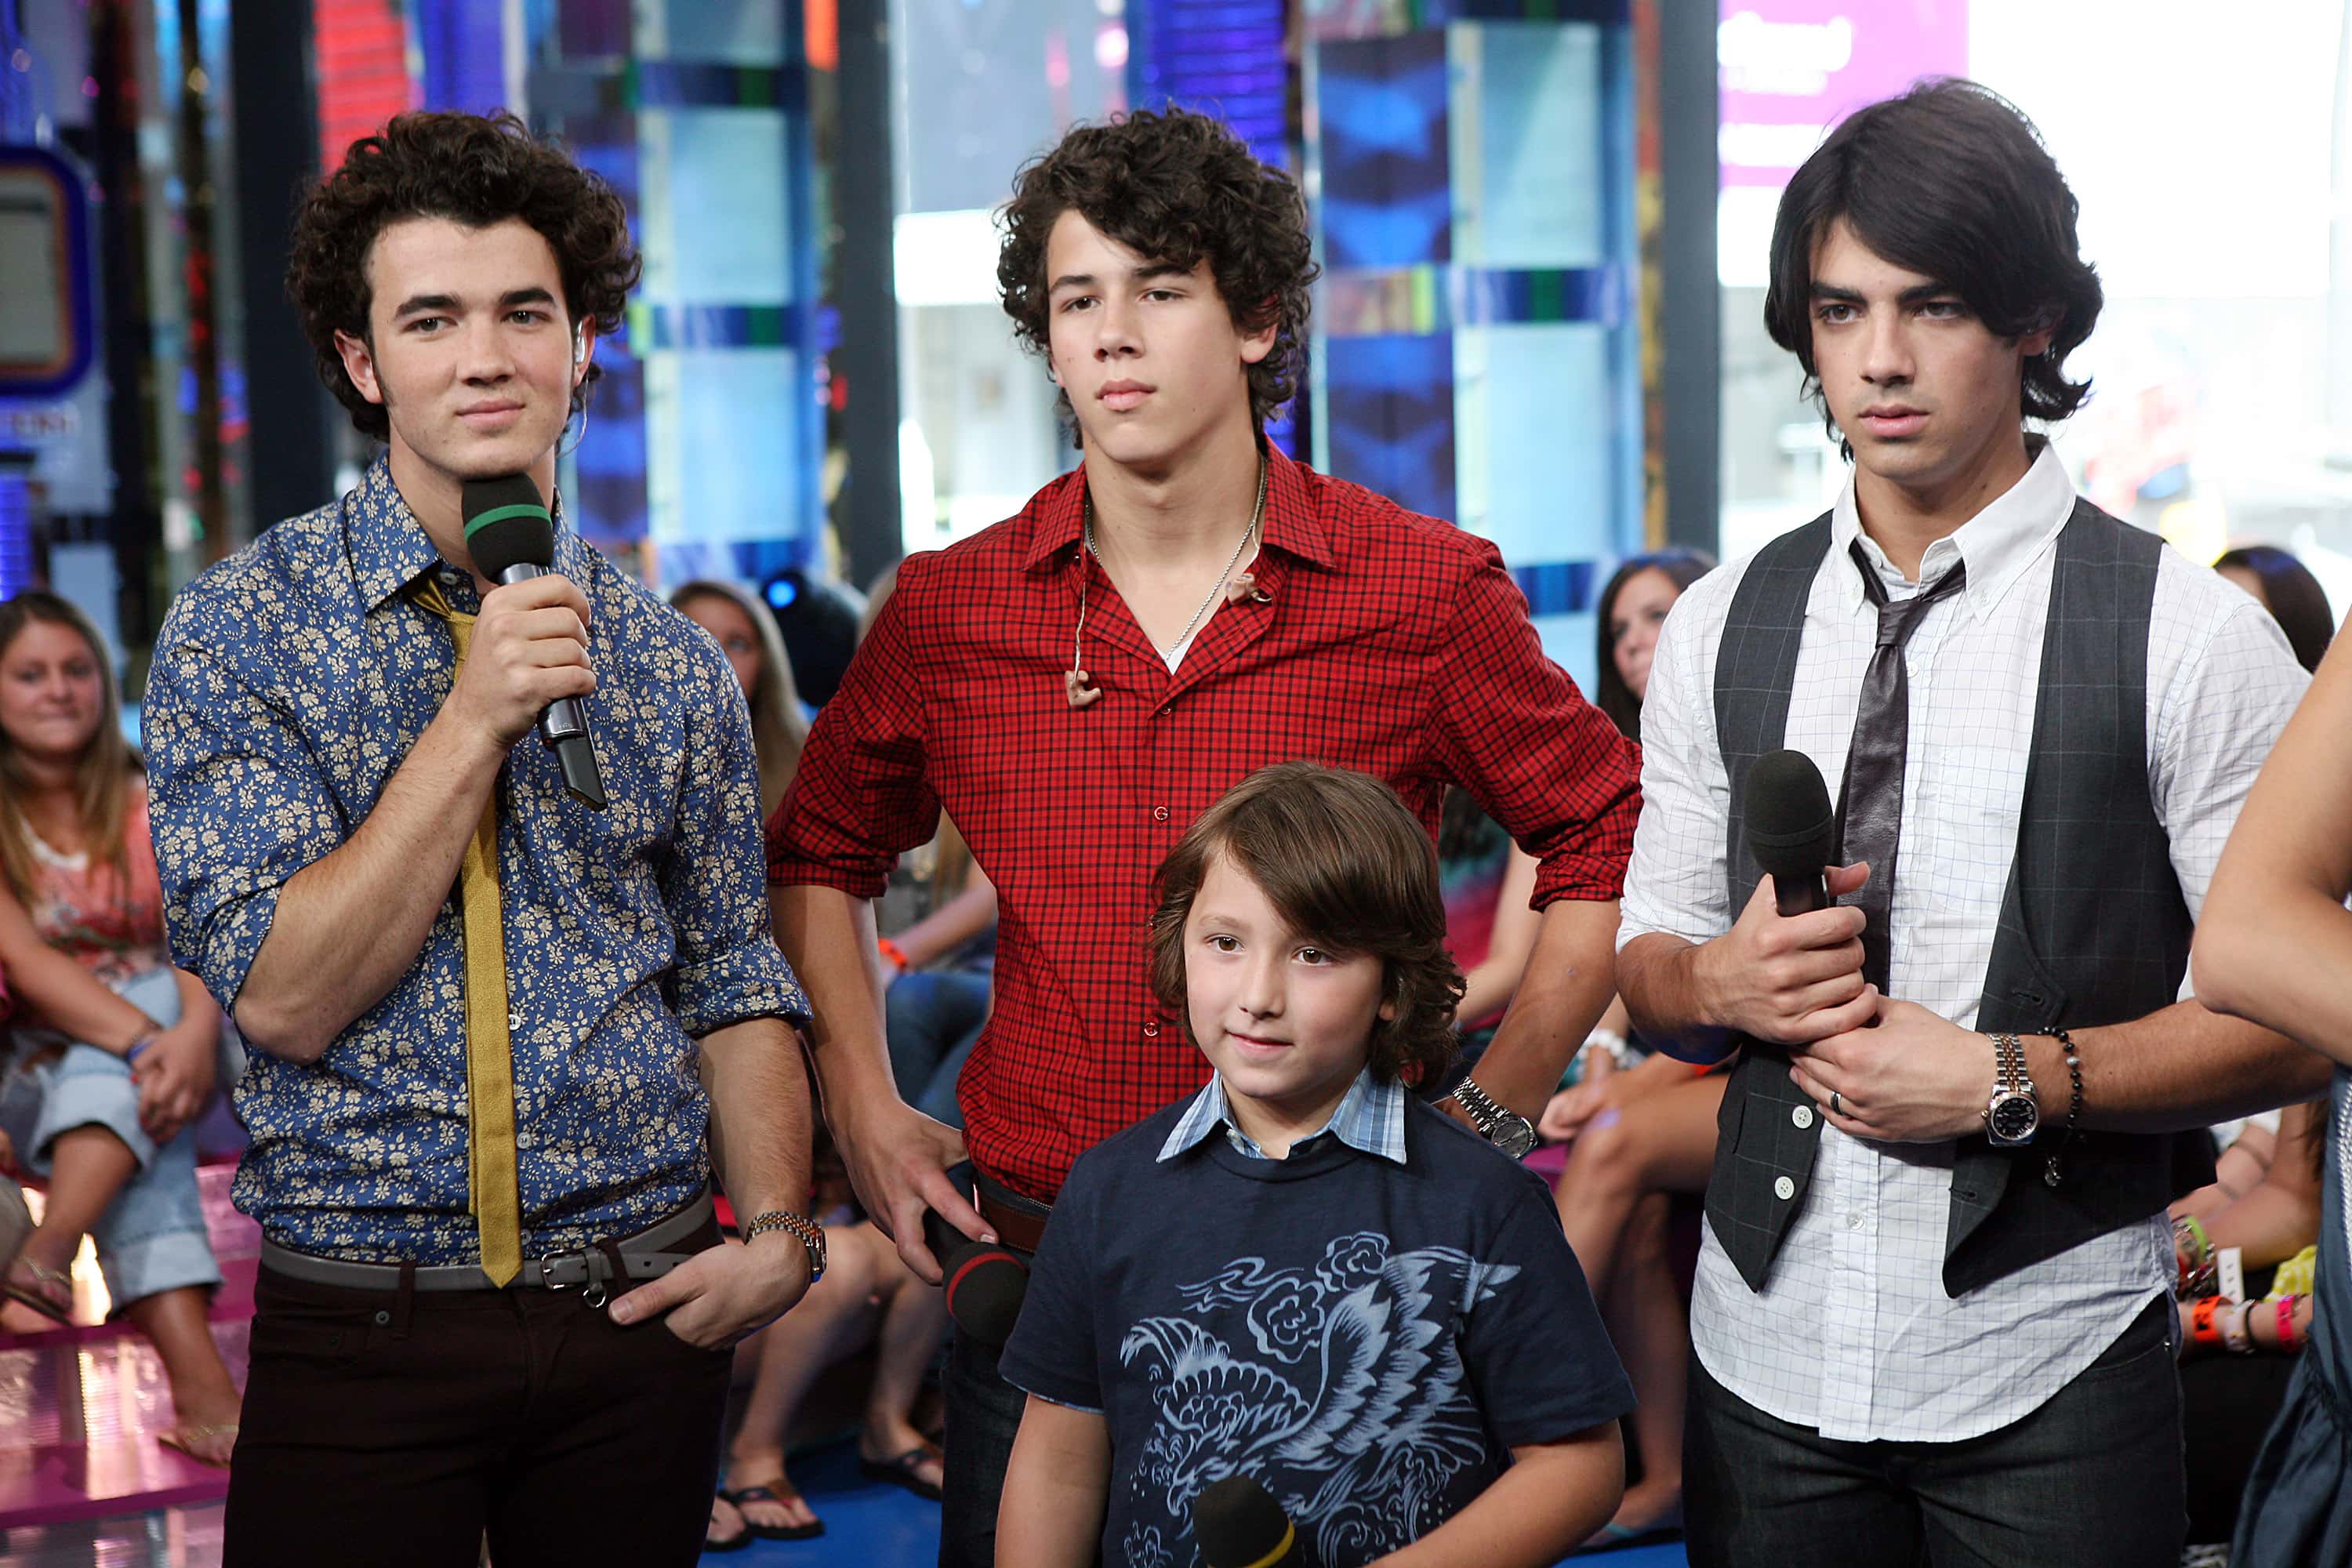 Harmonic Facts About The Jonas Brothers - Factinate